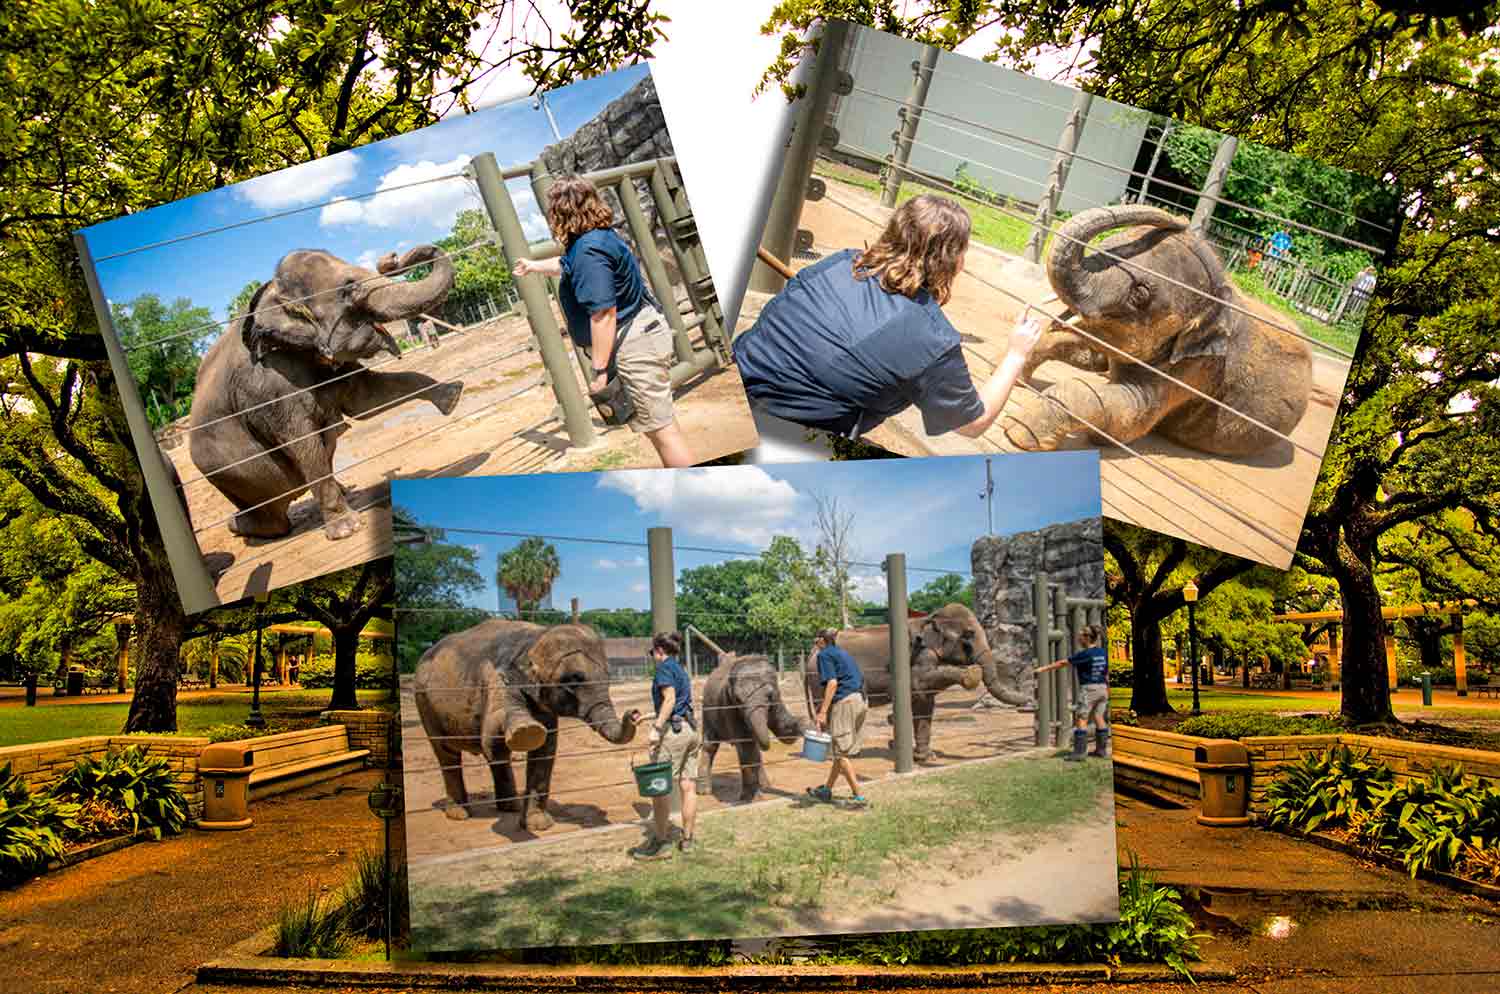 Three photos showing elephants doing yoga poses behind a fence with a trainer directing them in front of a background of trees and vegetation.